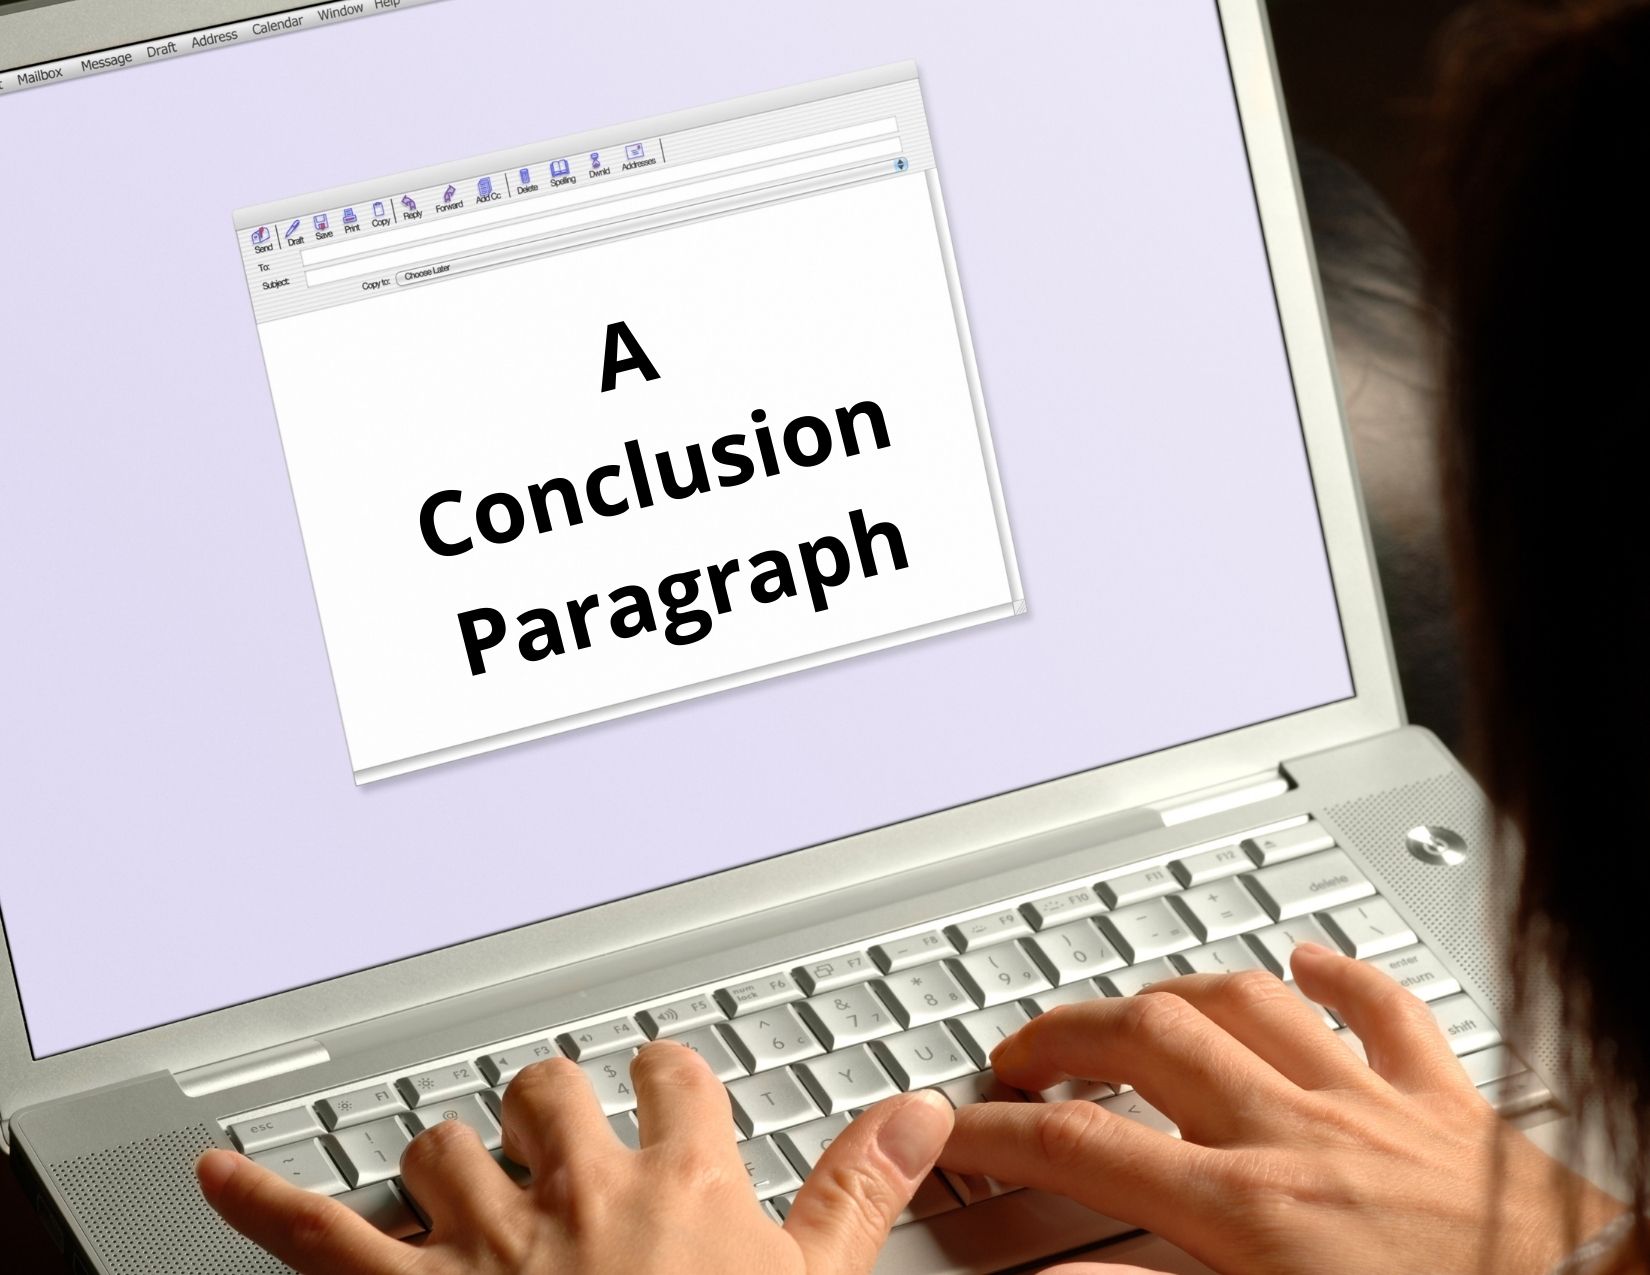 A picture of a computer with a window open and the words: A conclusion paragraph.